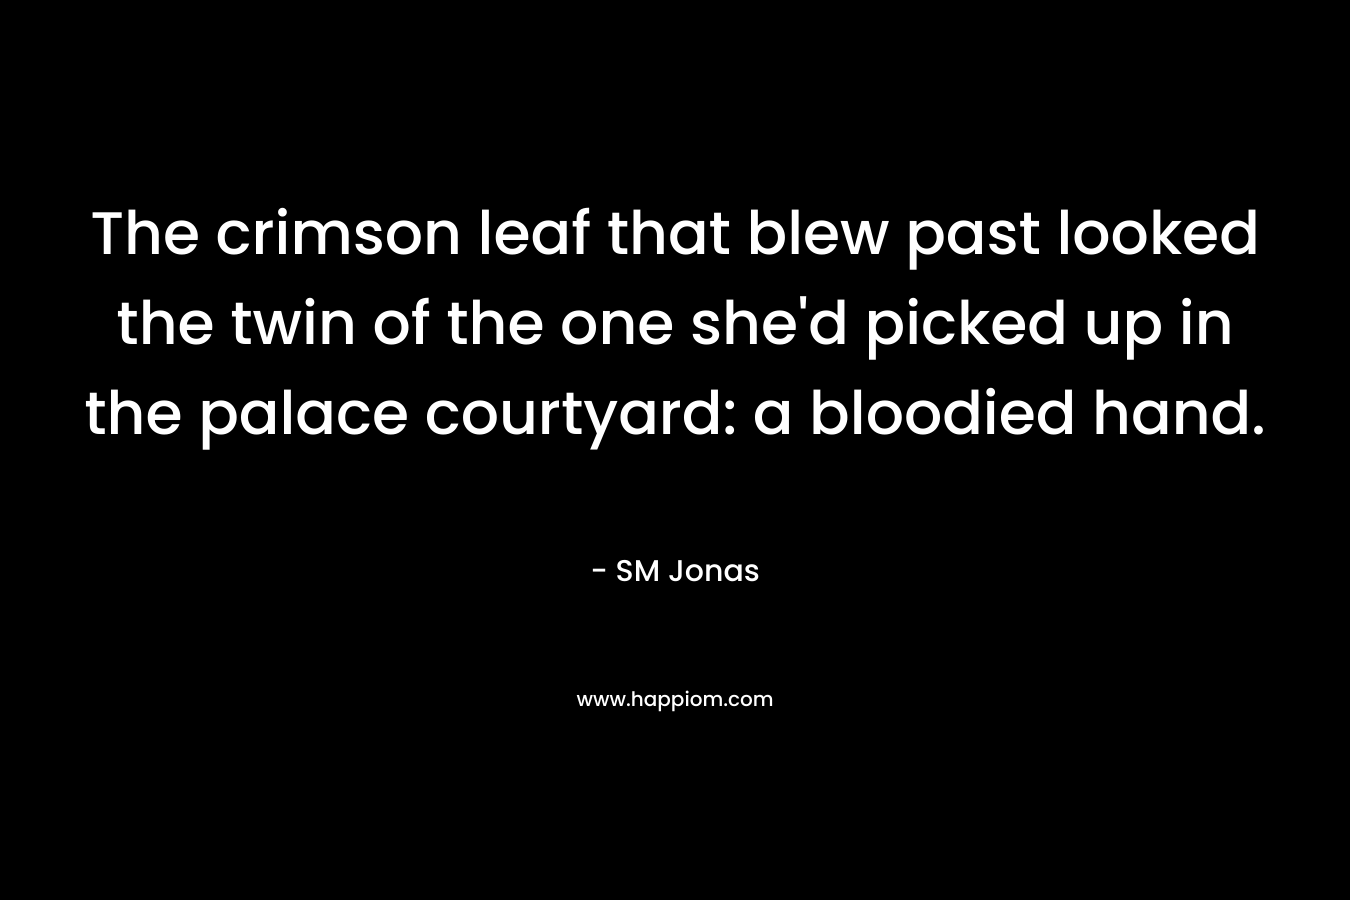 The crimson leaf that blew past looked the twin of the one she’d picked up in the palace courtyard: a bloodied hand. – SM Jonas